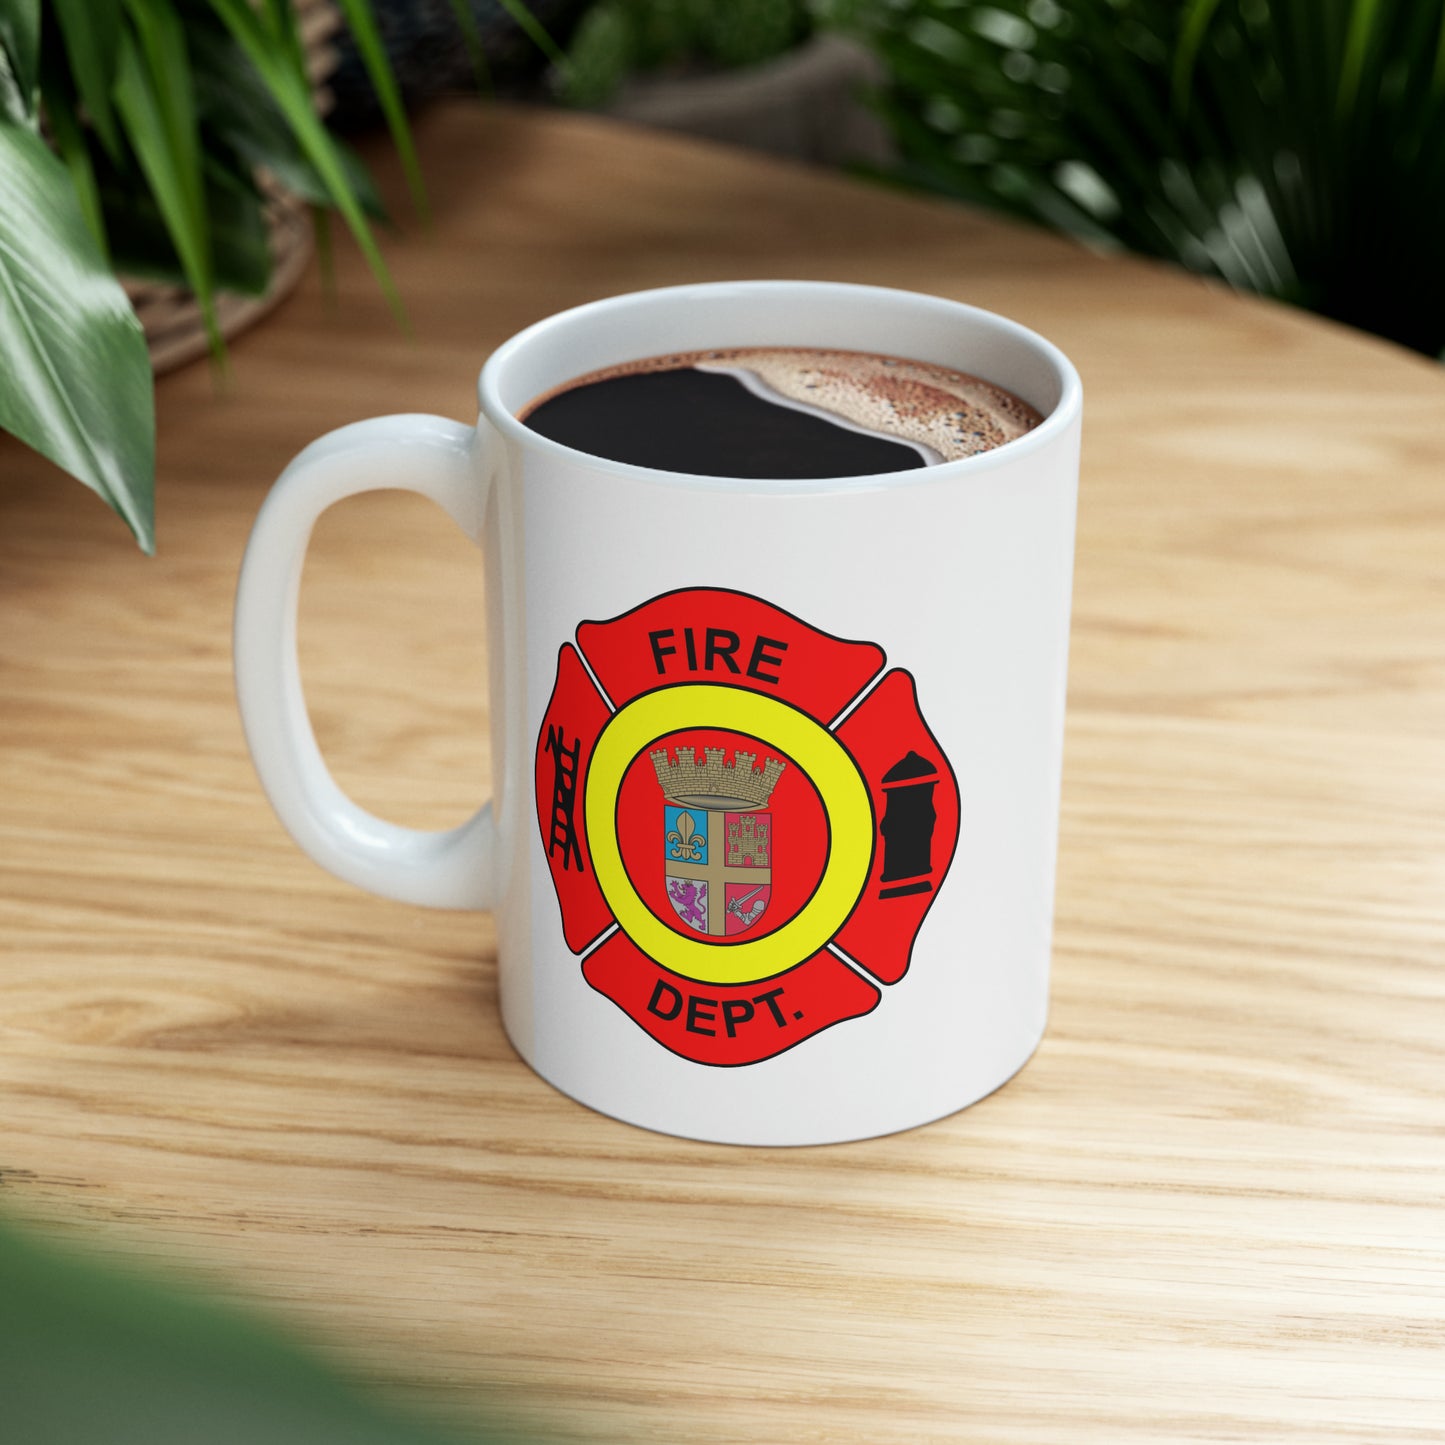 St Augustine Fire Department Coffee Mugs - Double Sided White Ceramic 11oz by TheGlassyLass.com